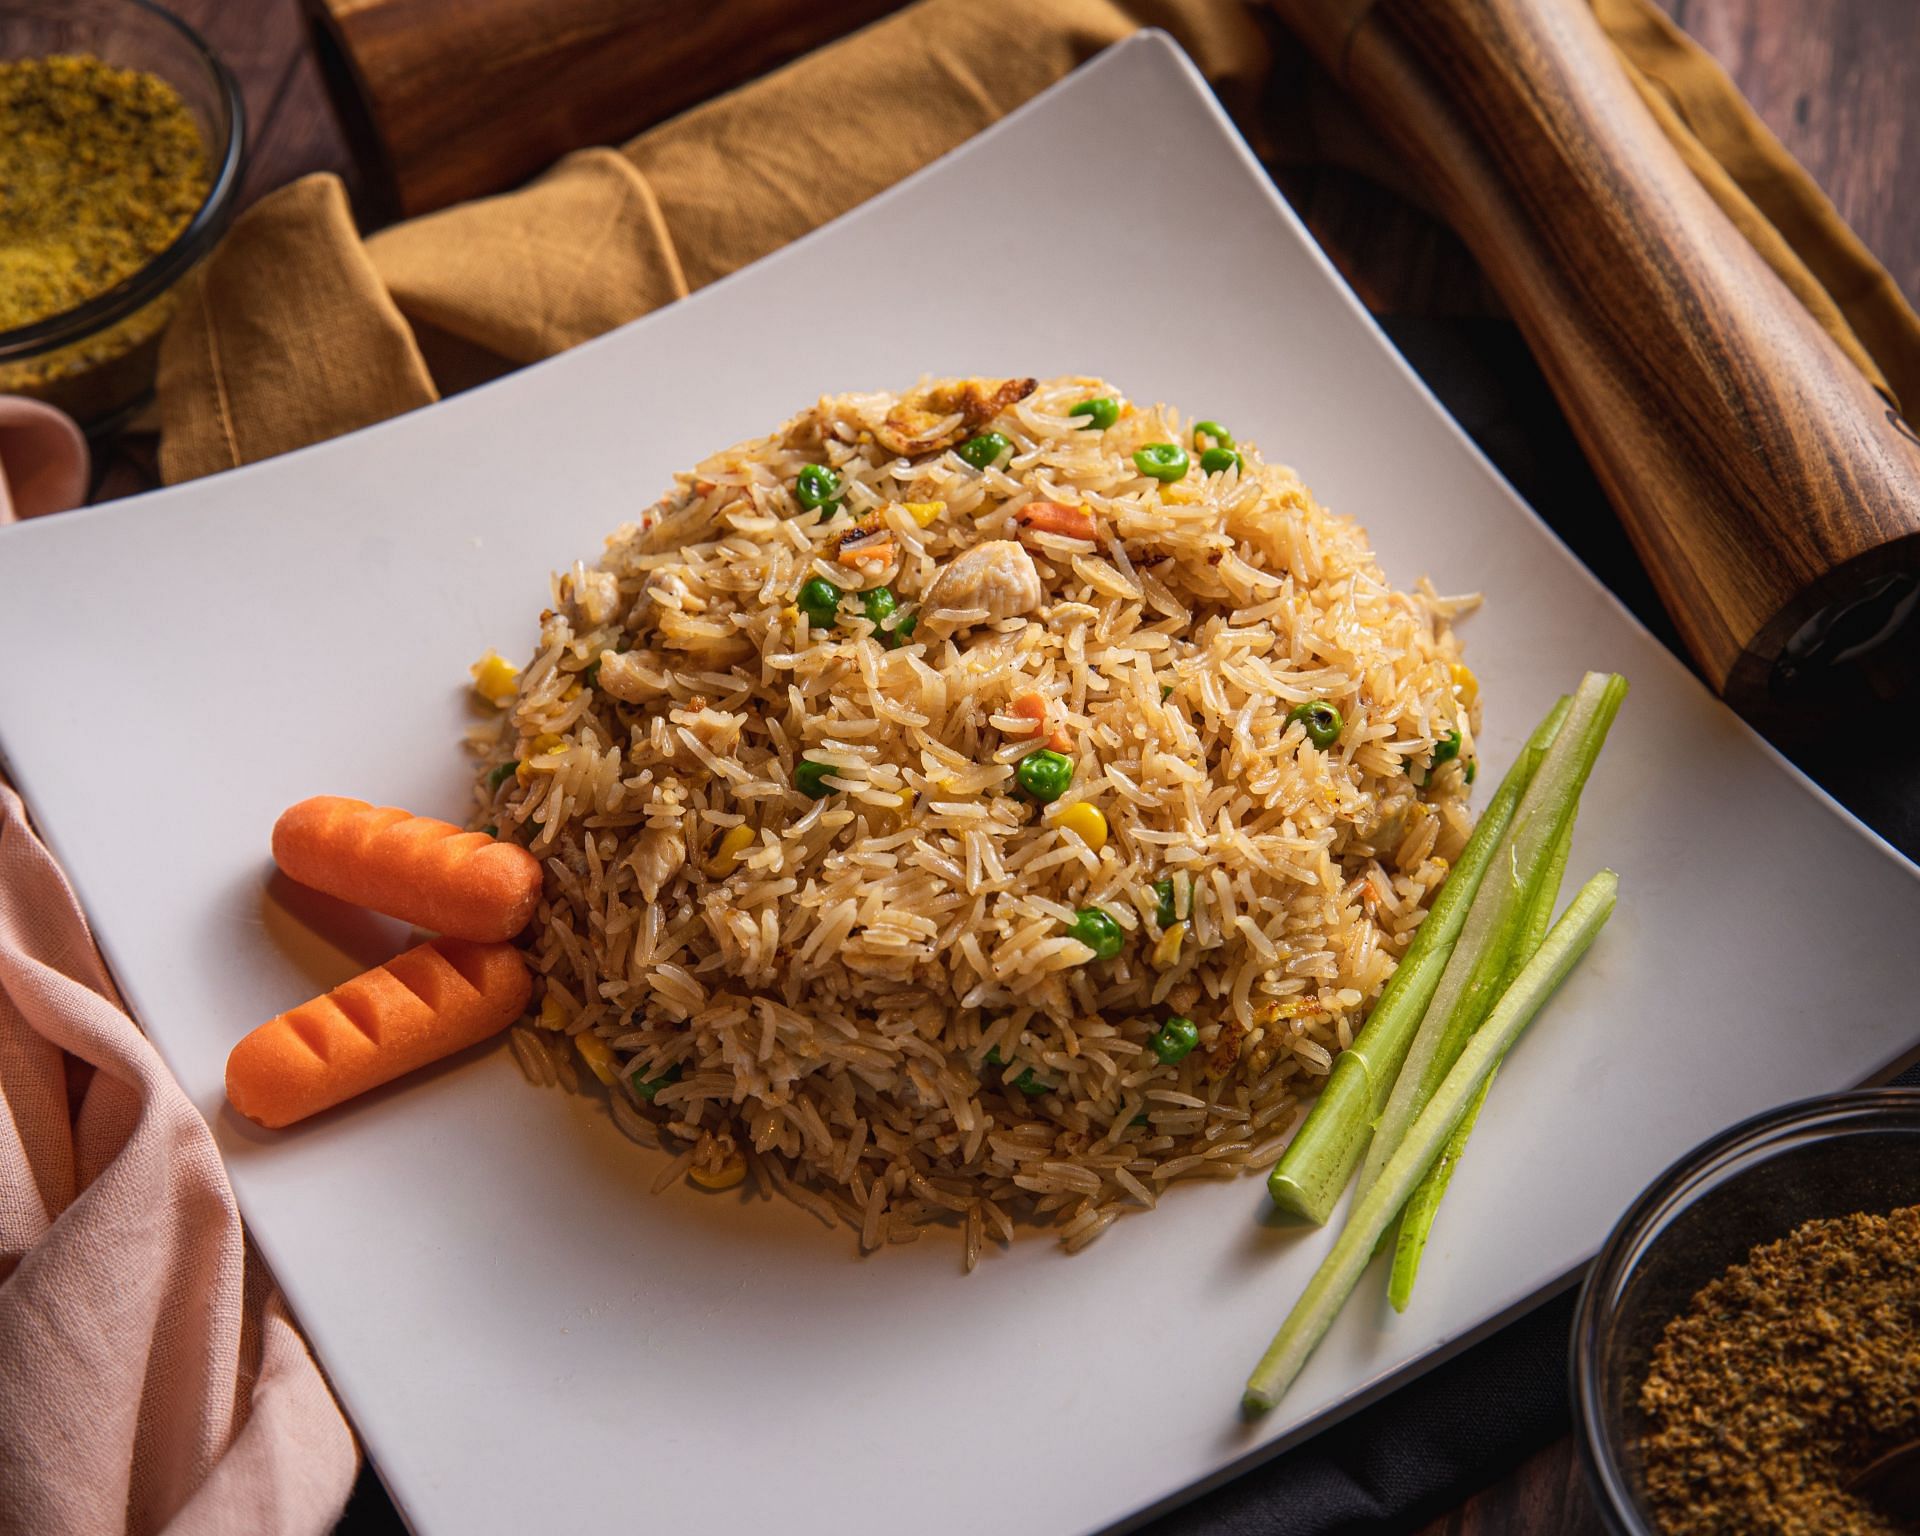 Brown rice is a better high carb alternative to white rice for muscle gain.